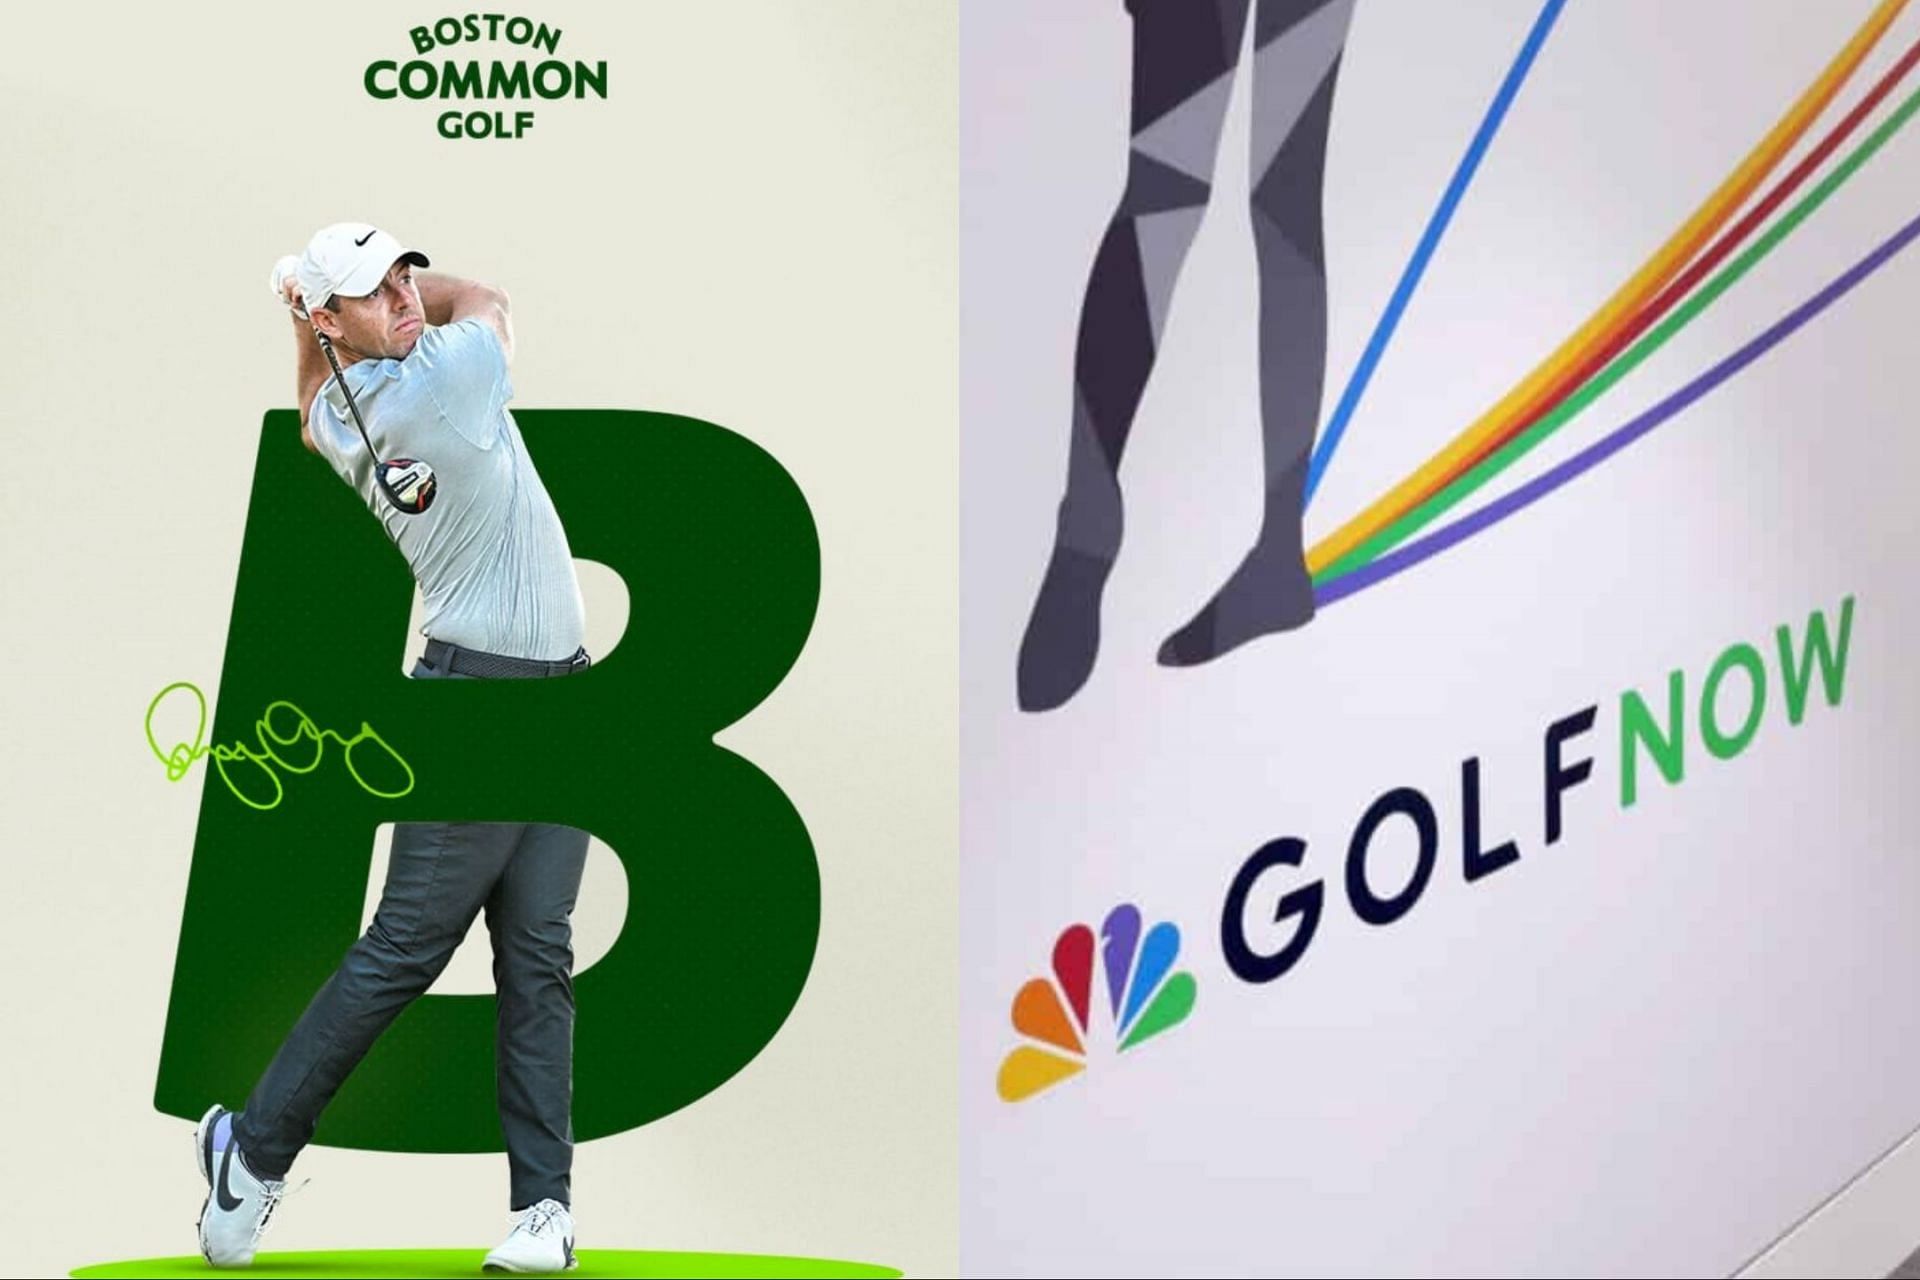 Boston Common Golf signs NBC Golf Now for producing a docuseries on the TGL team